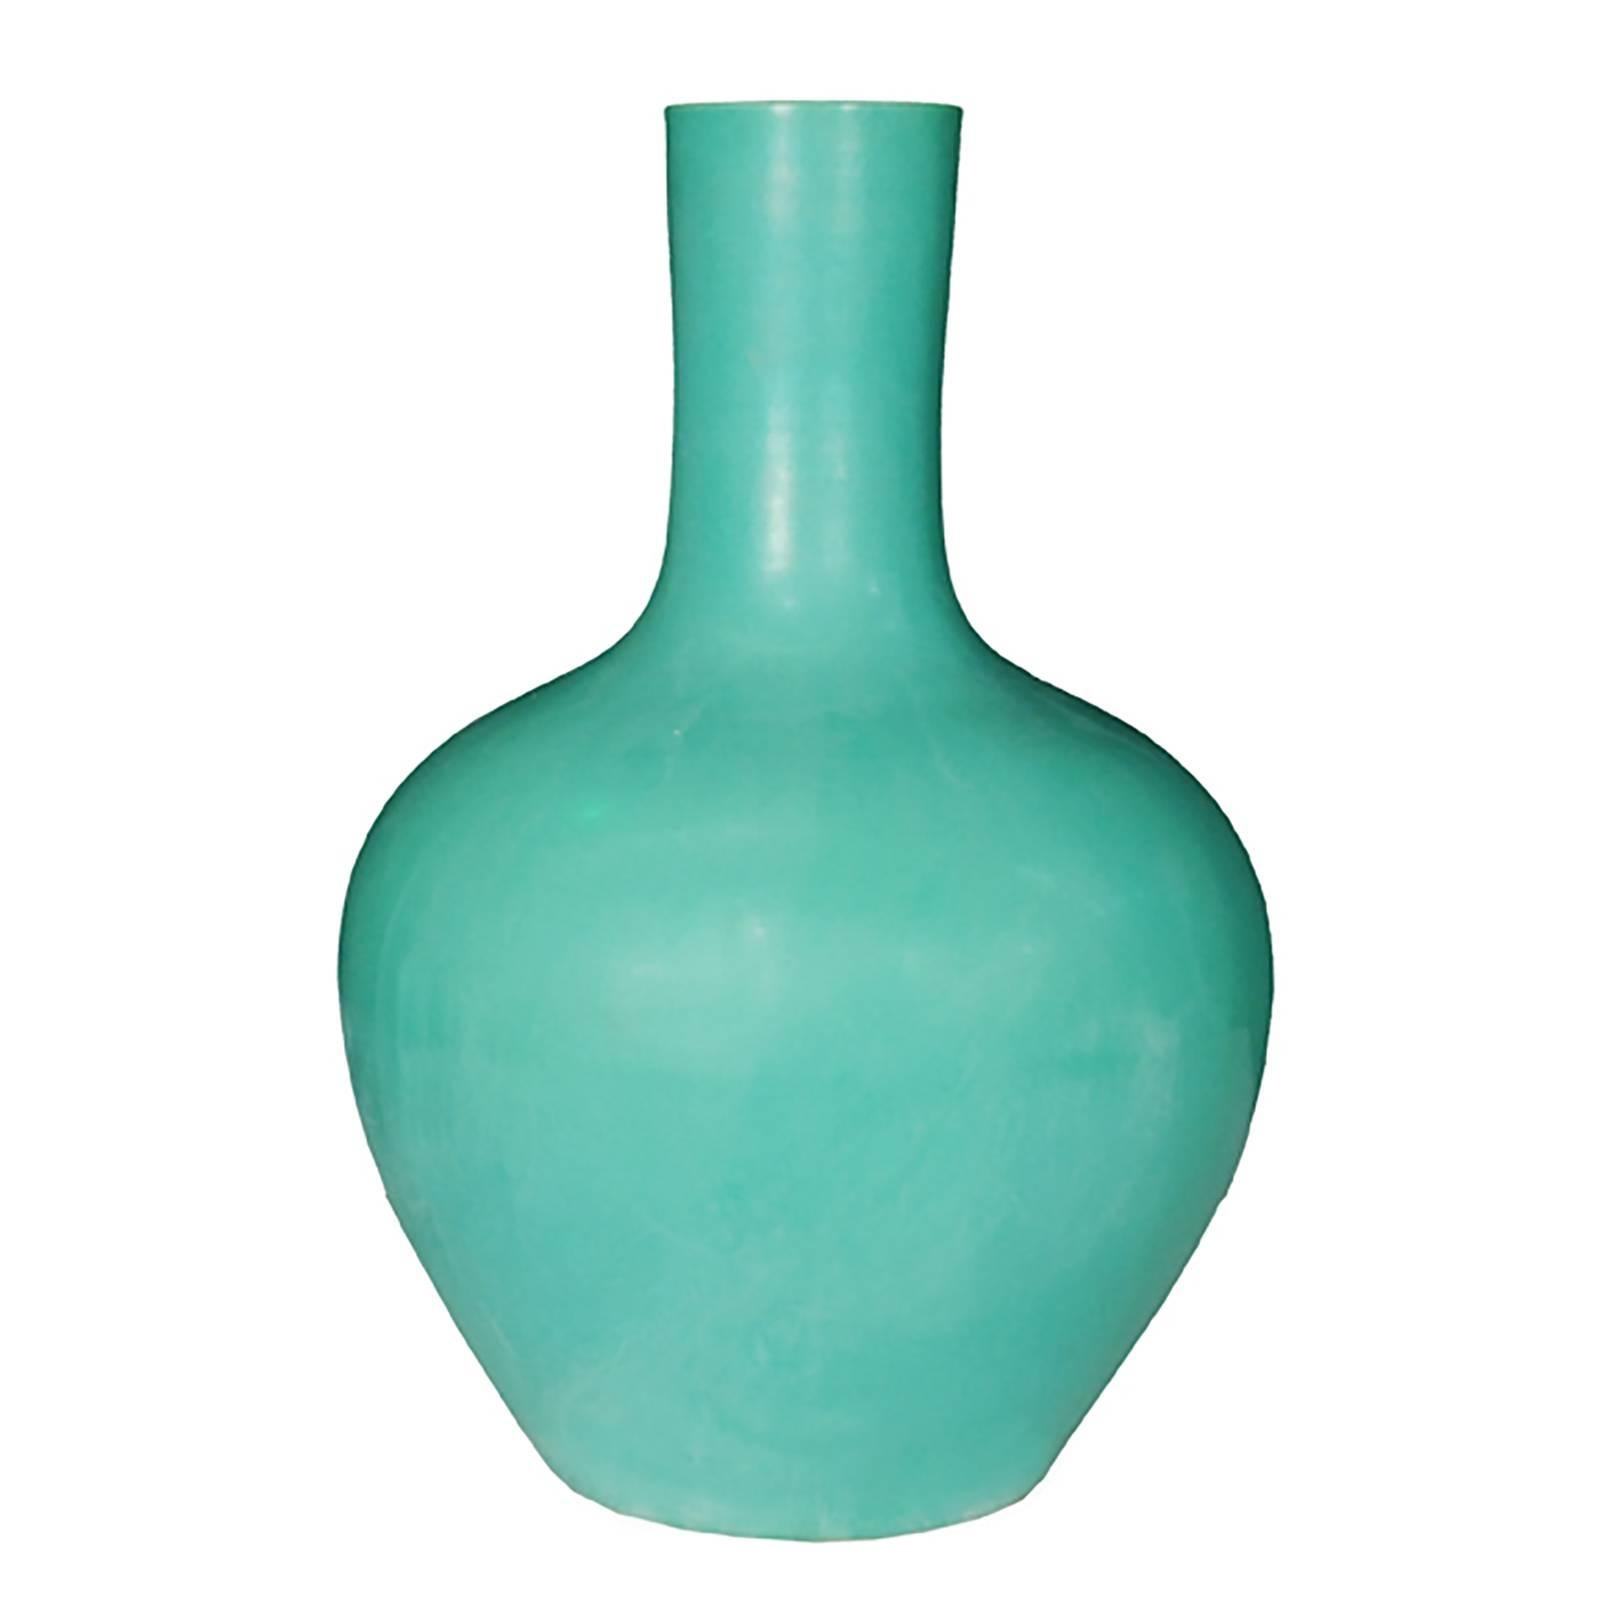 The shape of this contemporary vase is referred to as gooseneck. It was hand made in Southern China with a rich jade colored glaze according to ancient techniques rooted in the Song dynasty (960 to 1279), when the art of monochrome porcelains was